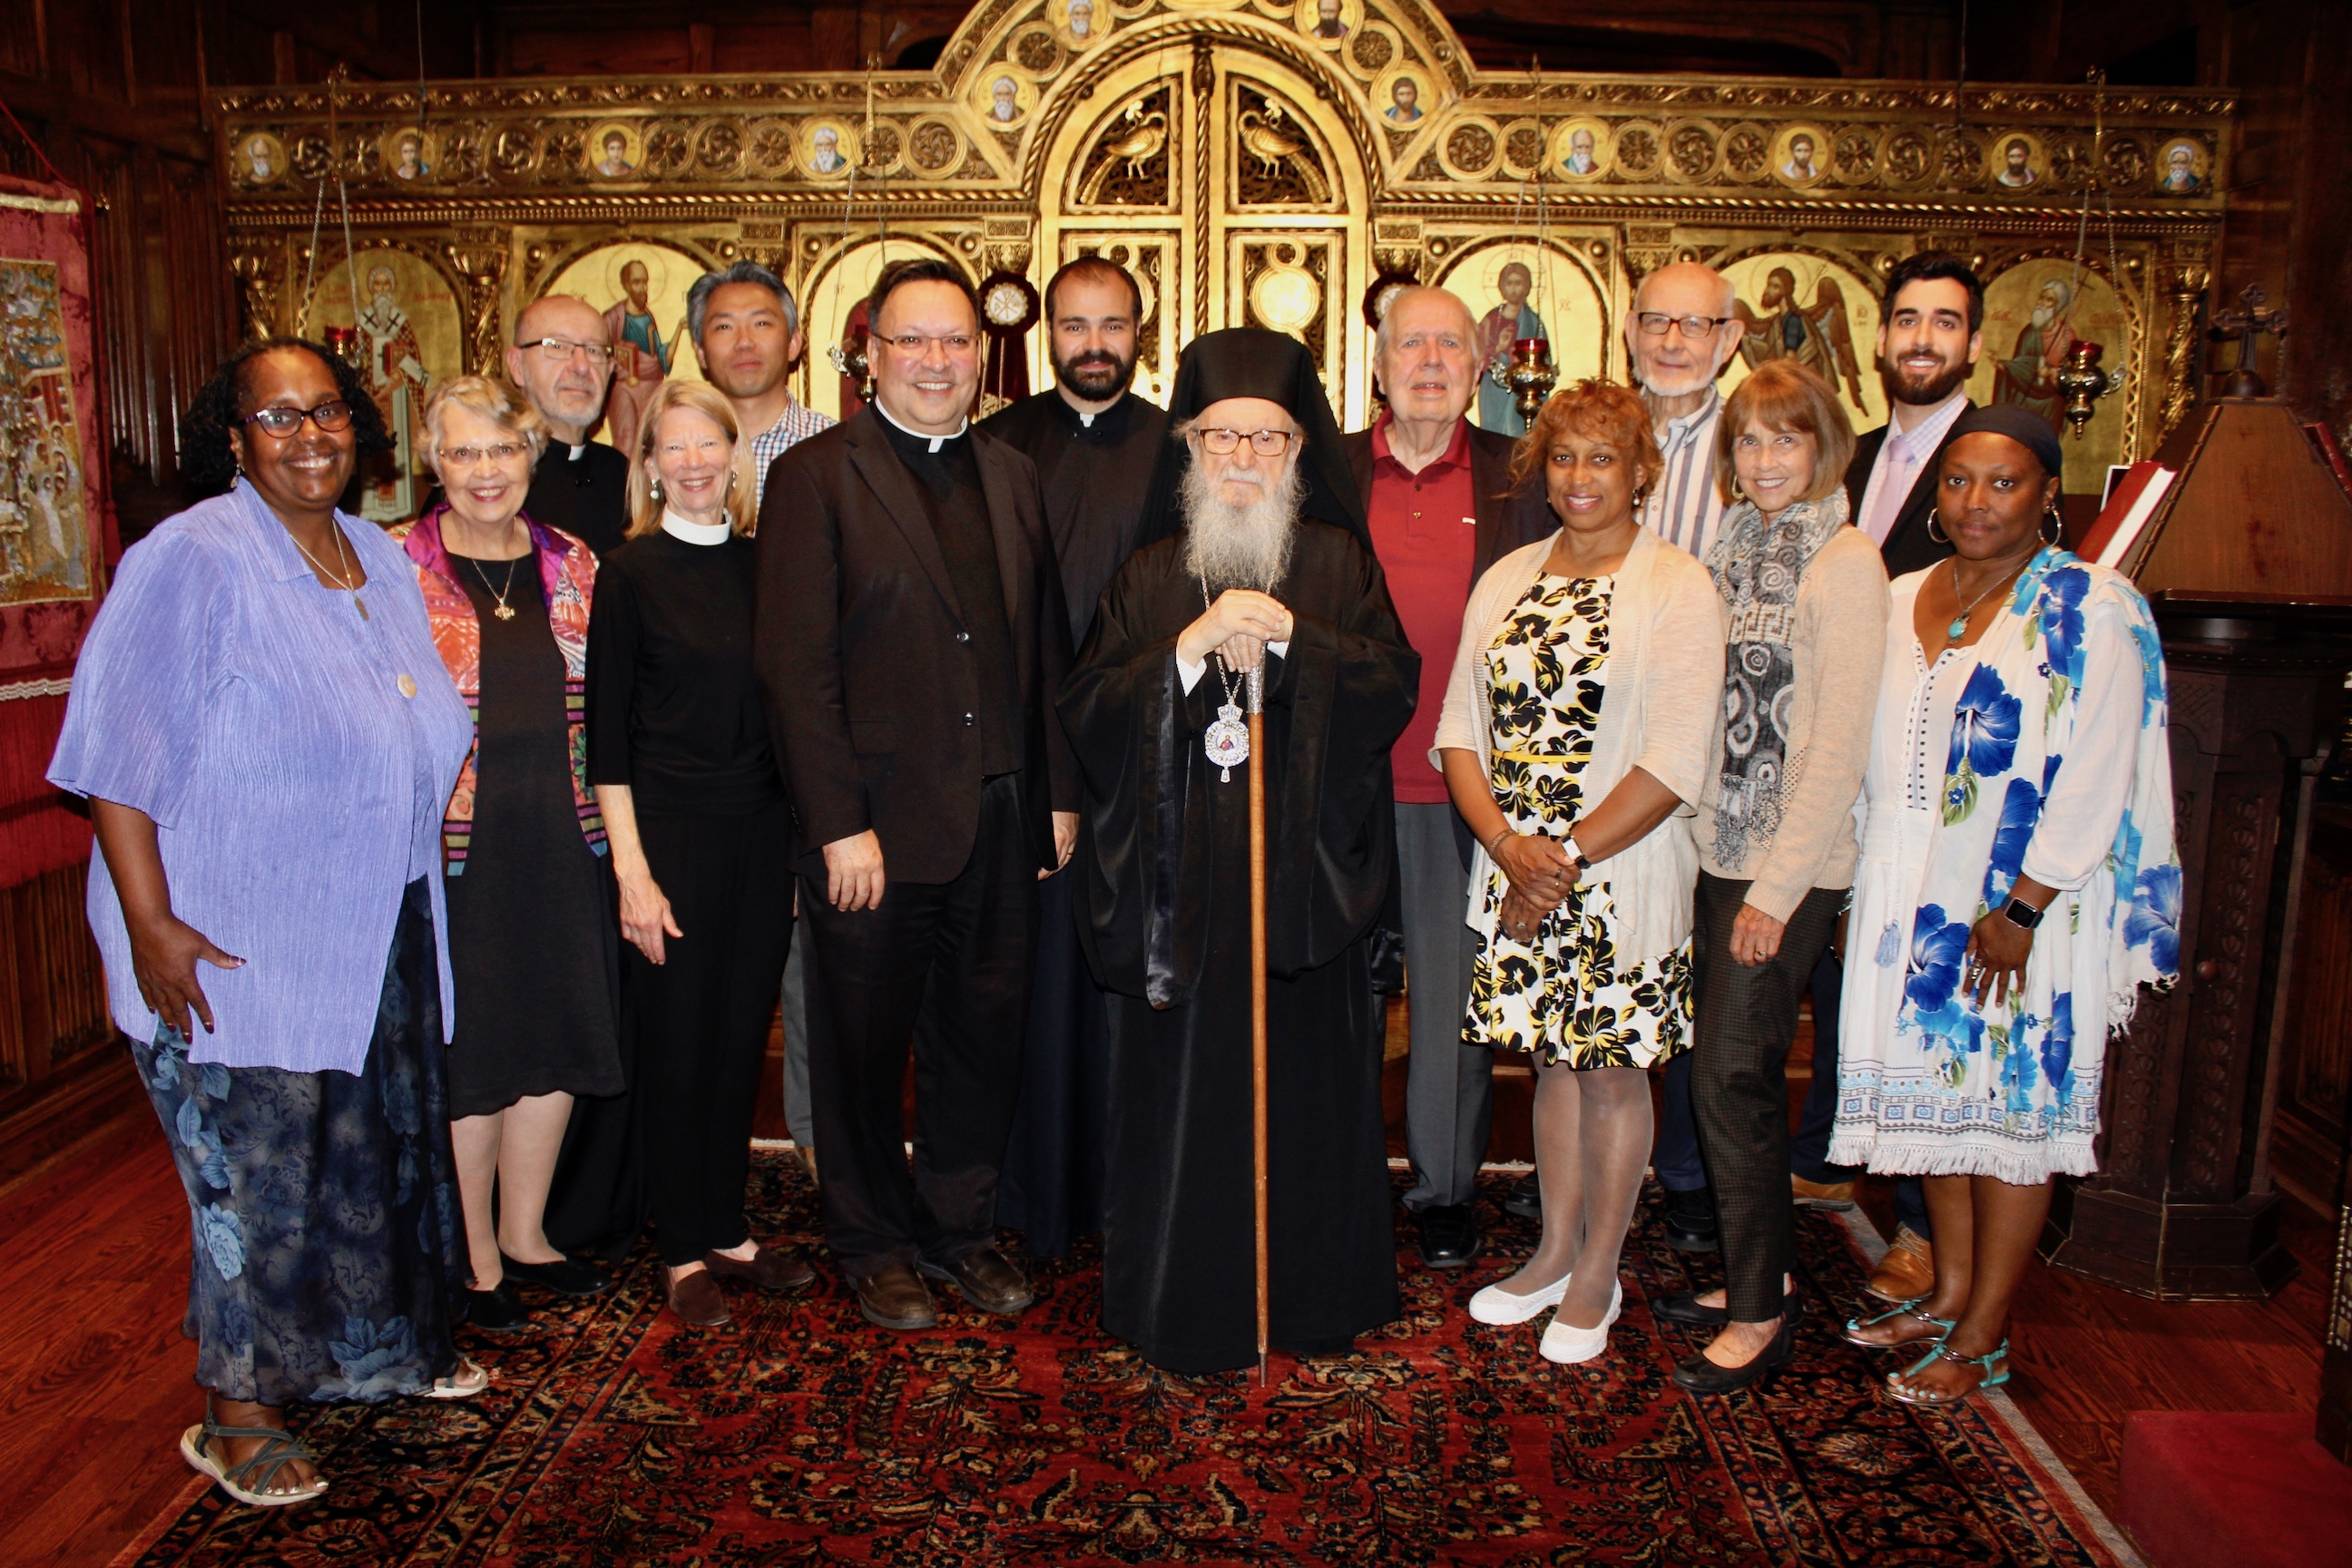 His Eminence Archbishop Demetrios Geron of America with representatives from eleven different Churches and Communions